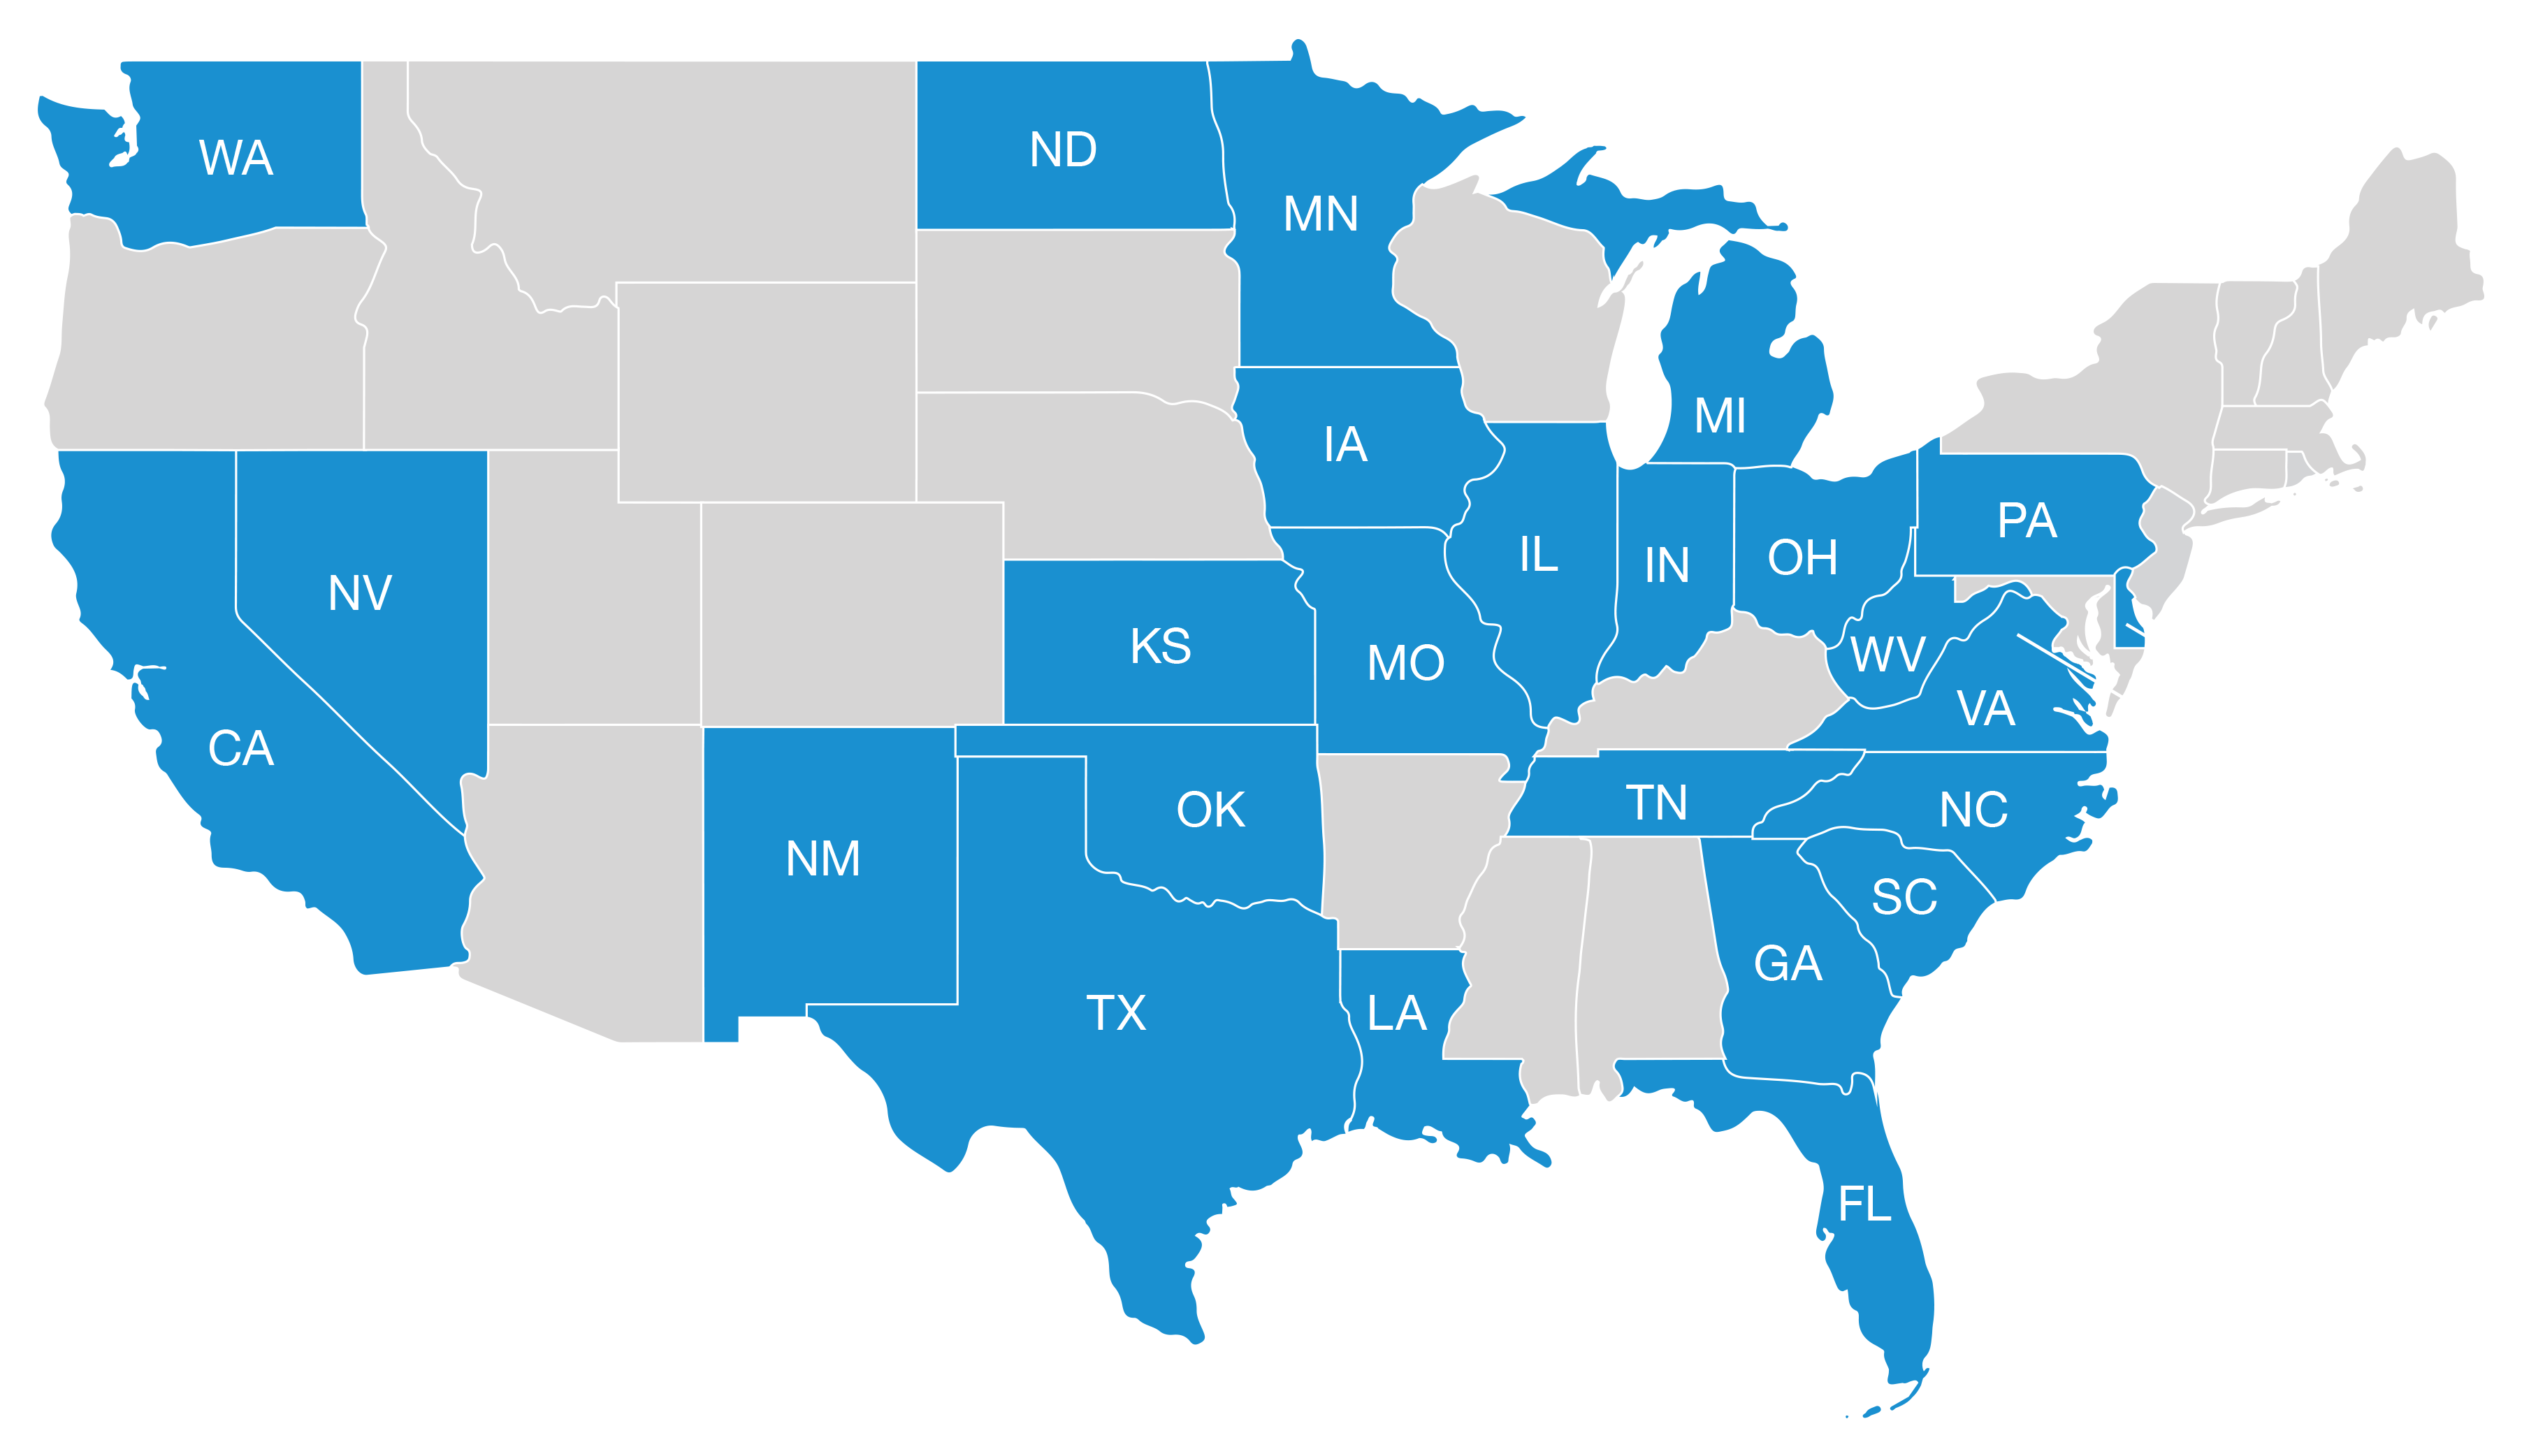 U.S. map of states with CIS affiliates